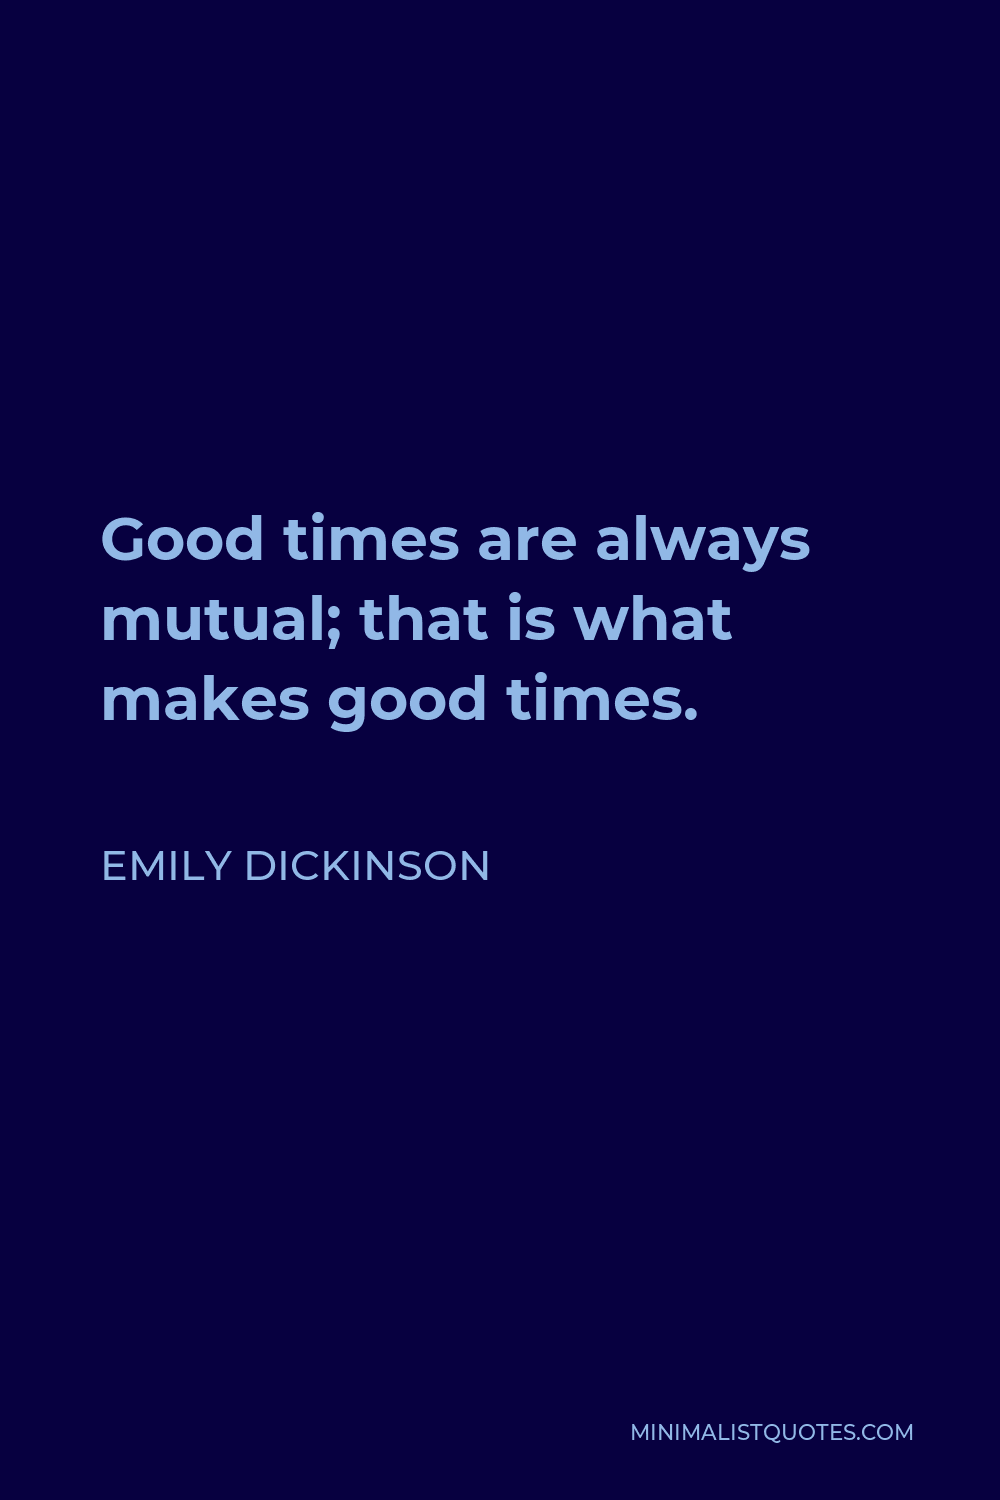 Emily Dickinson Quote - Good times are always mutual; that is what makes good times.